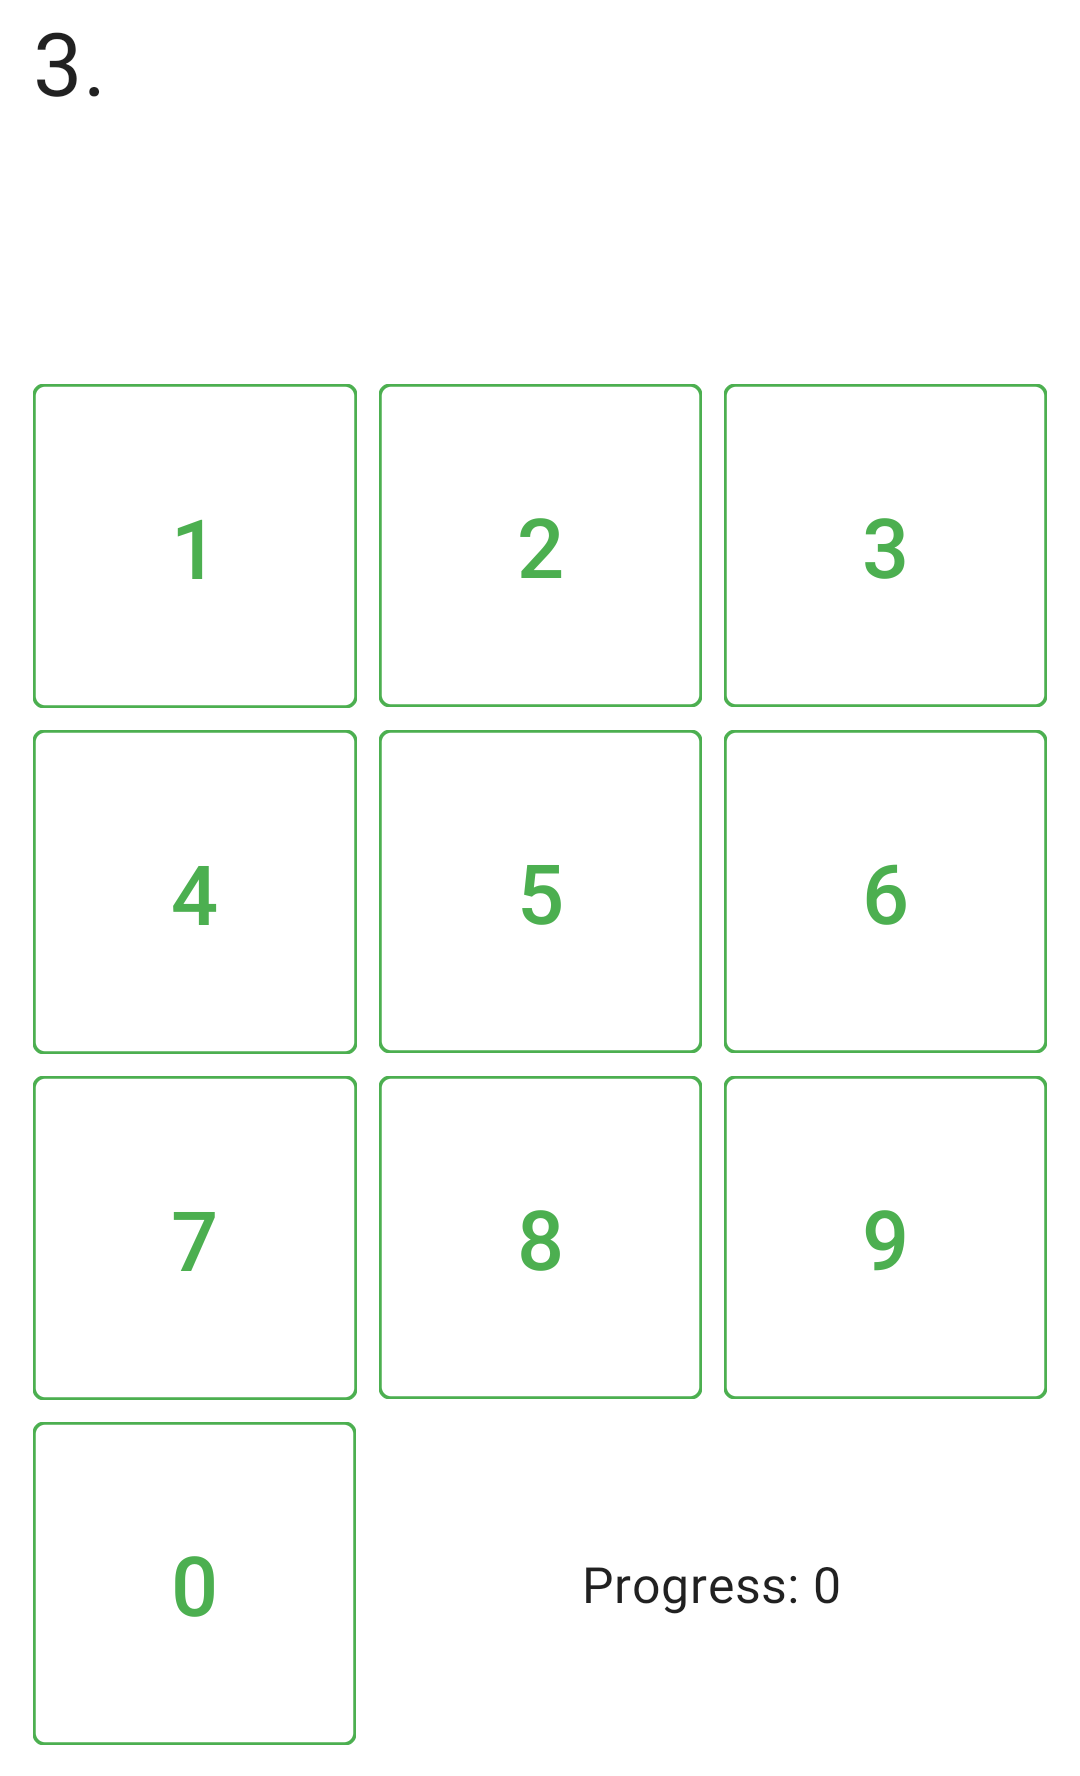 The completed keypad